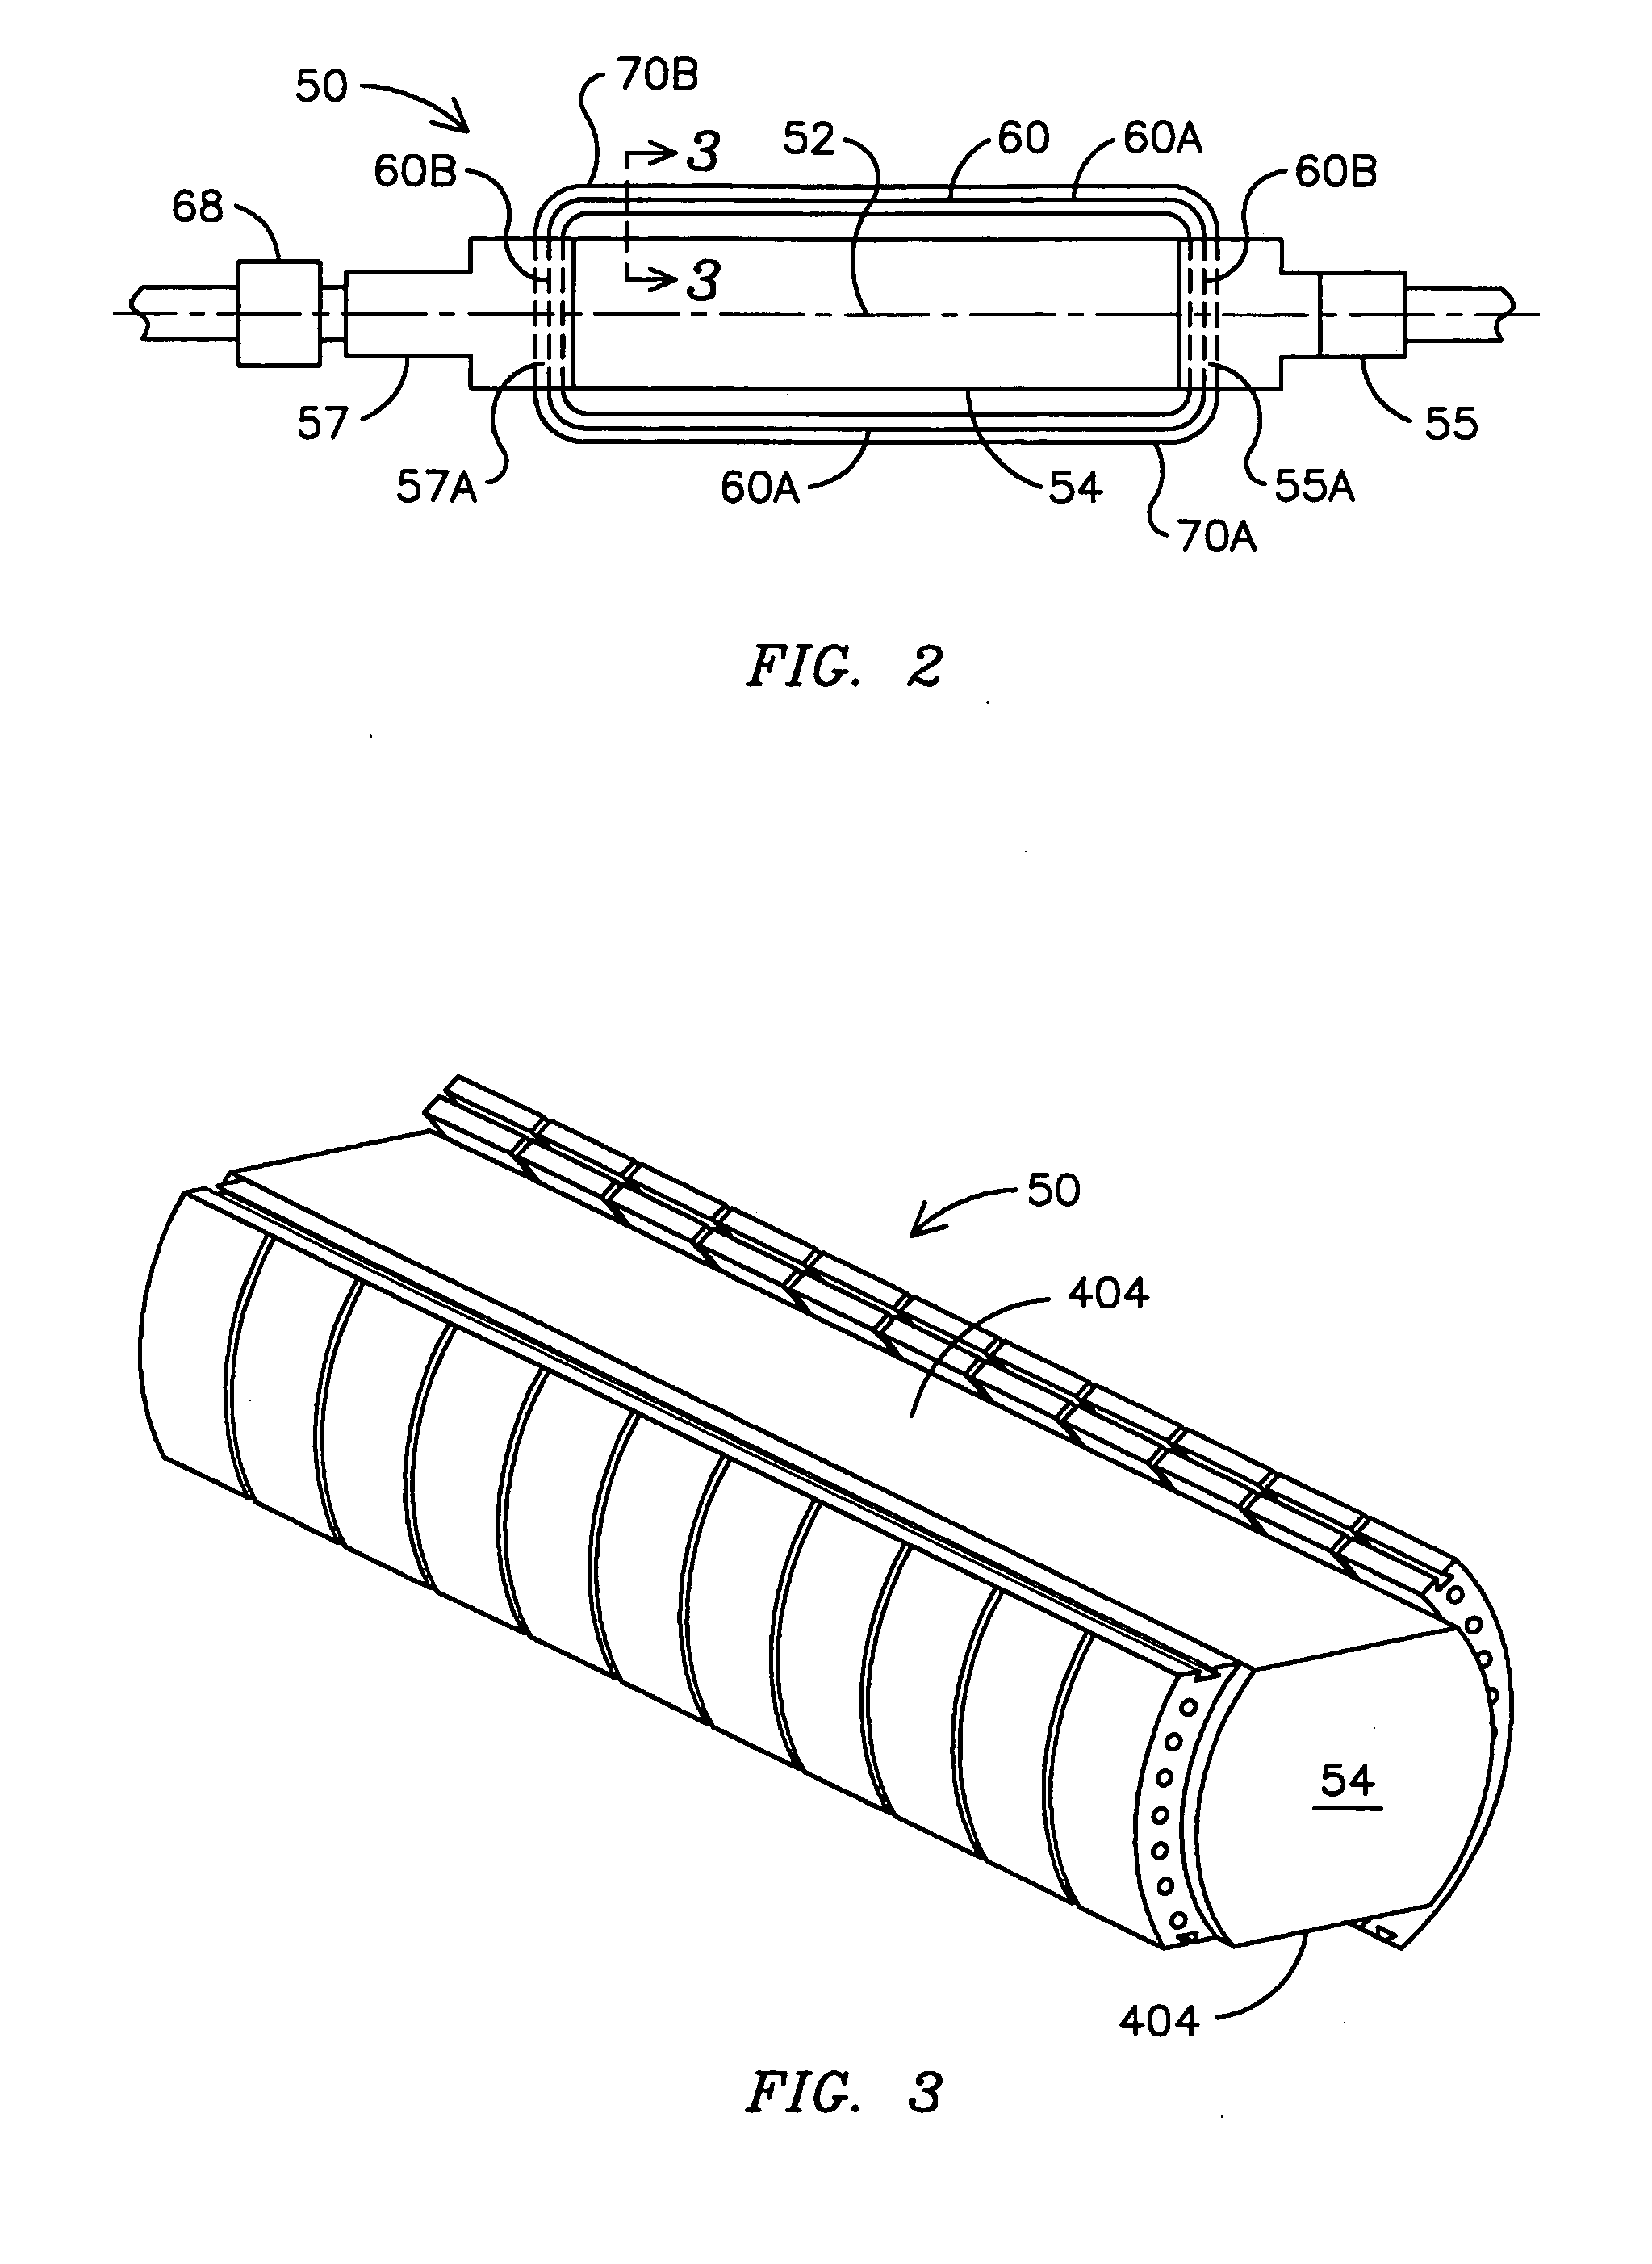 Rotor winding shield for a superconducting electric generator